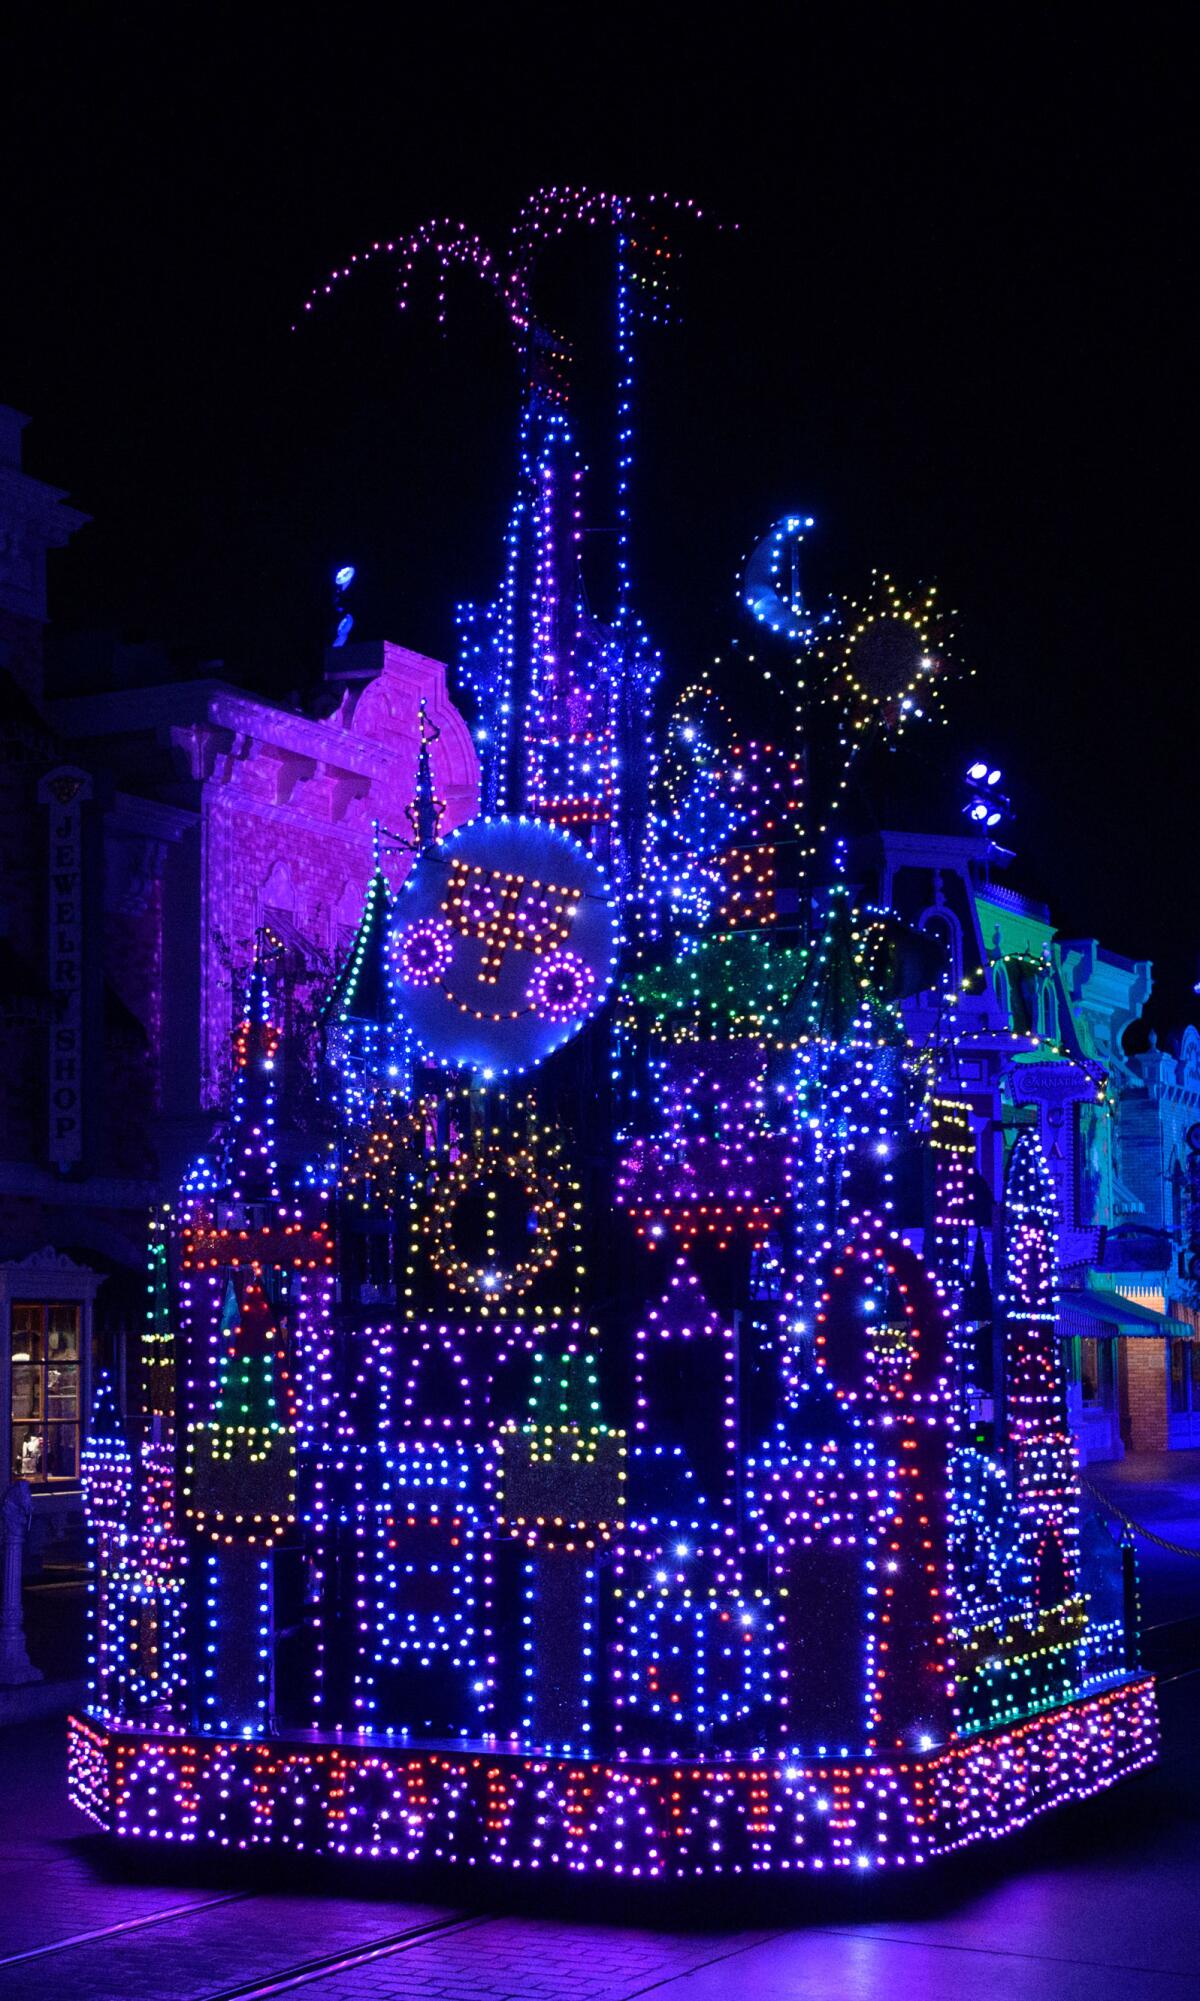 A float of a giant castle illuminated in the night